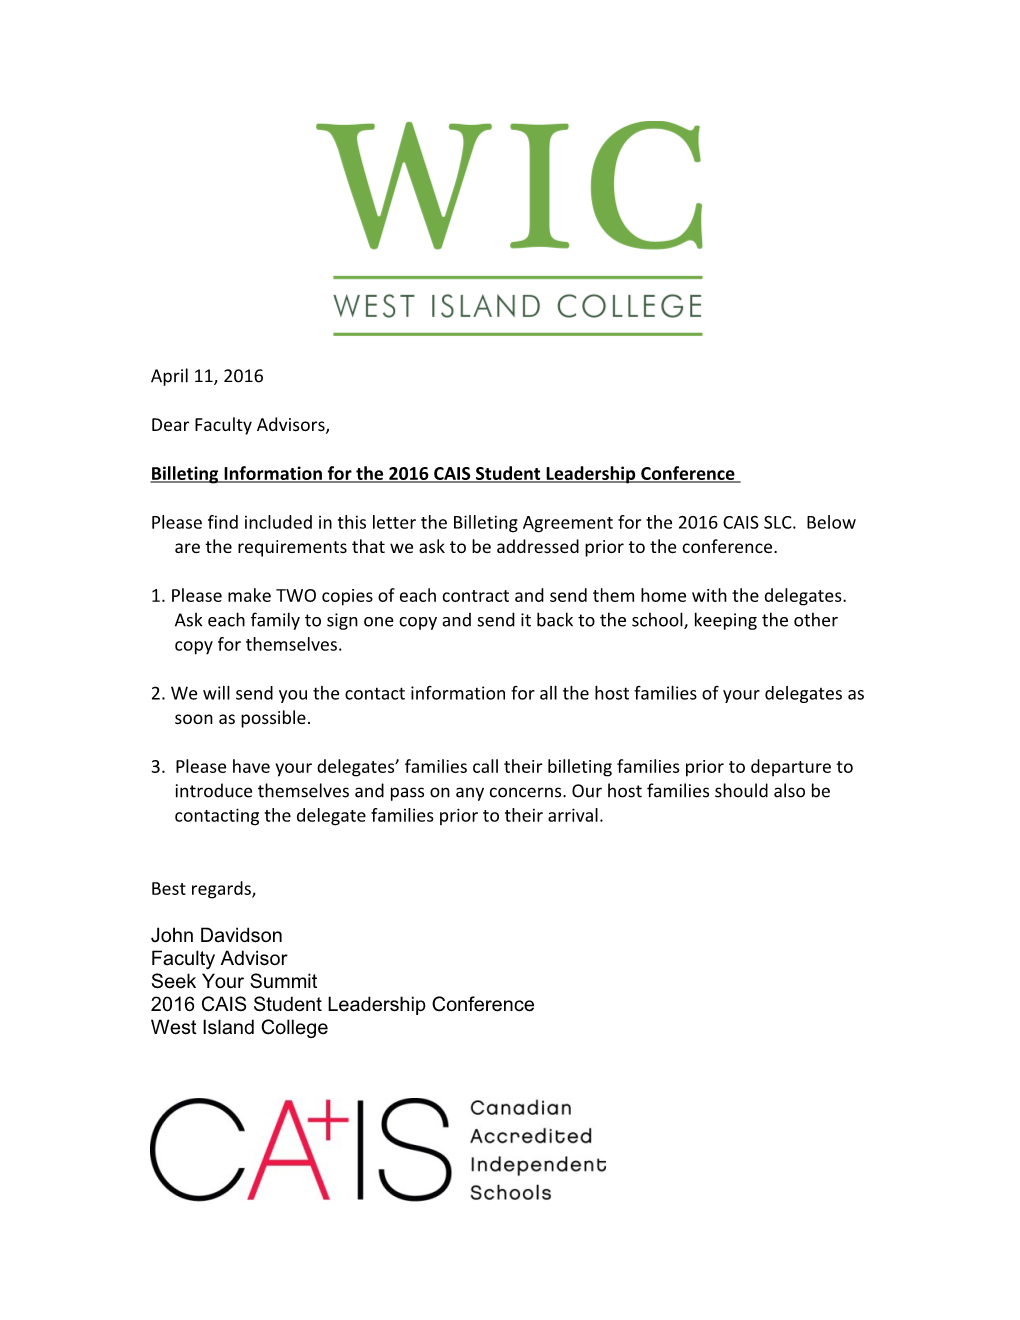 Billeting Information for the 2016 CAIS Student Leadership Conference